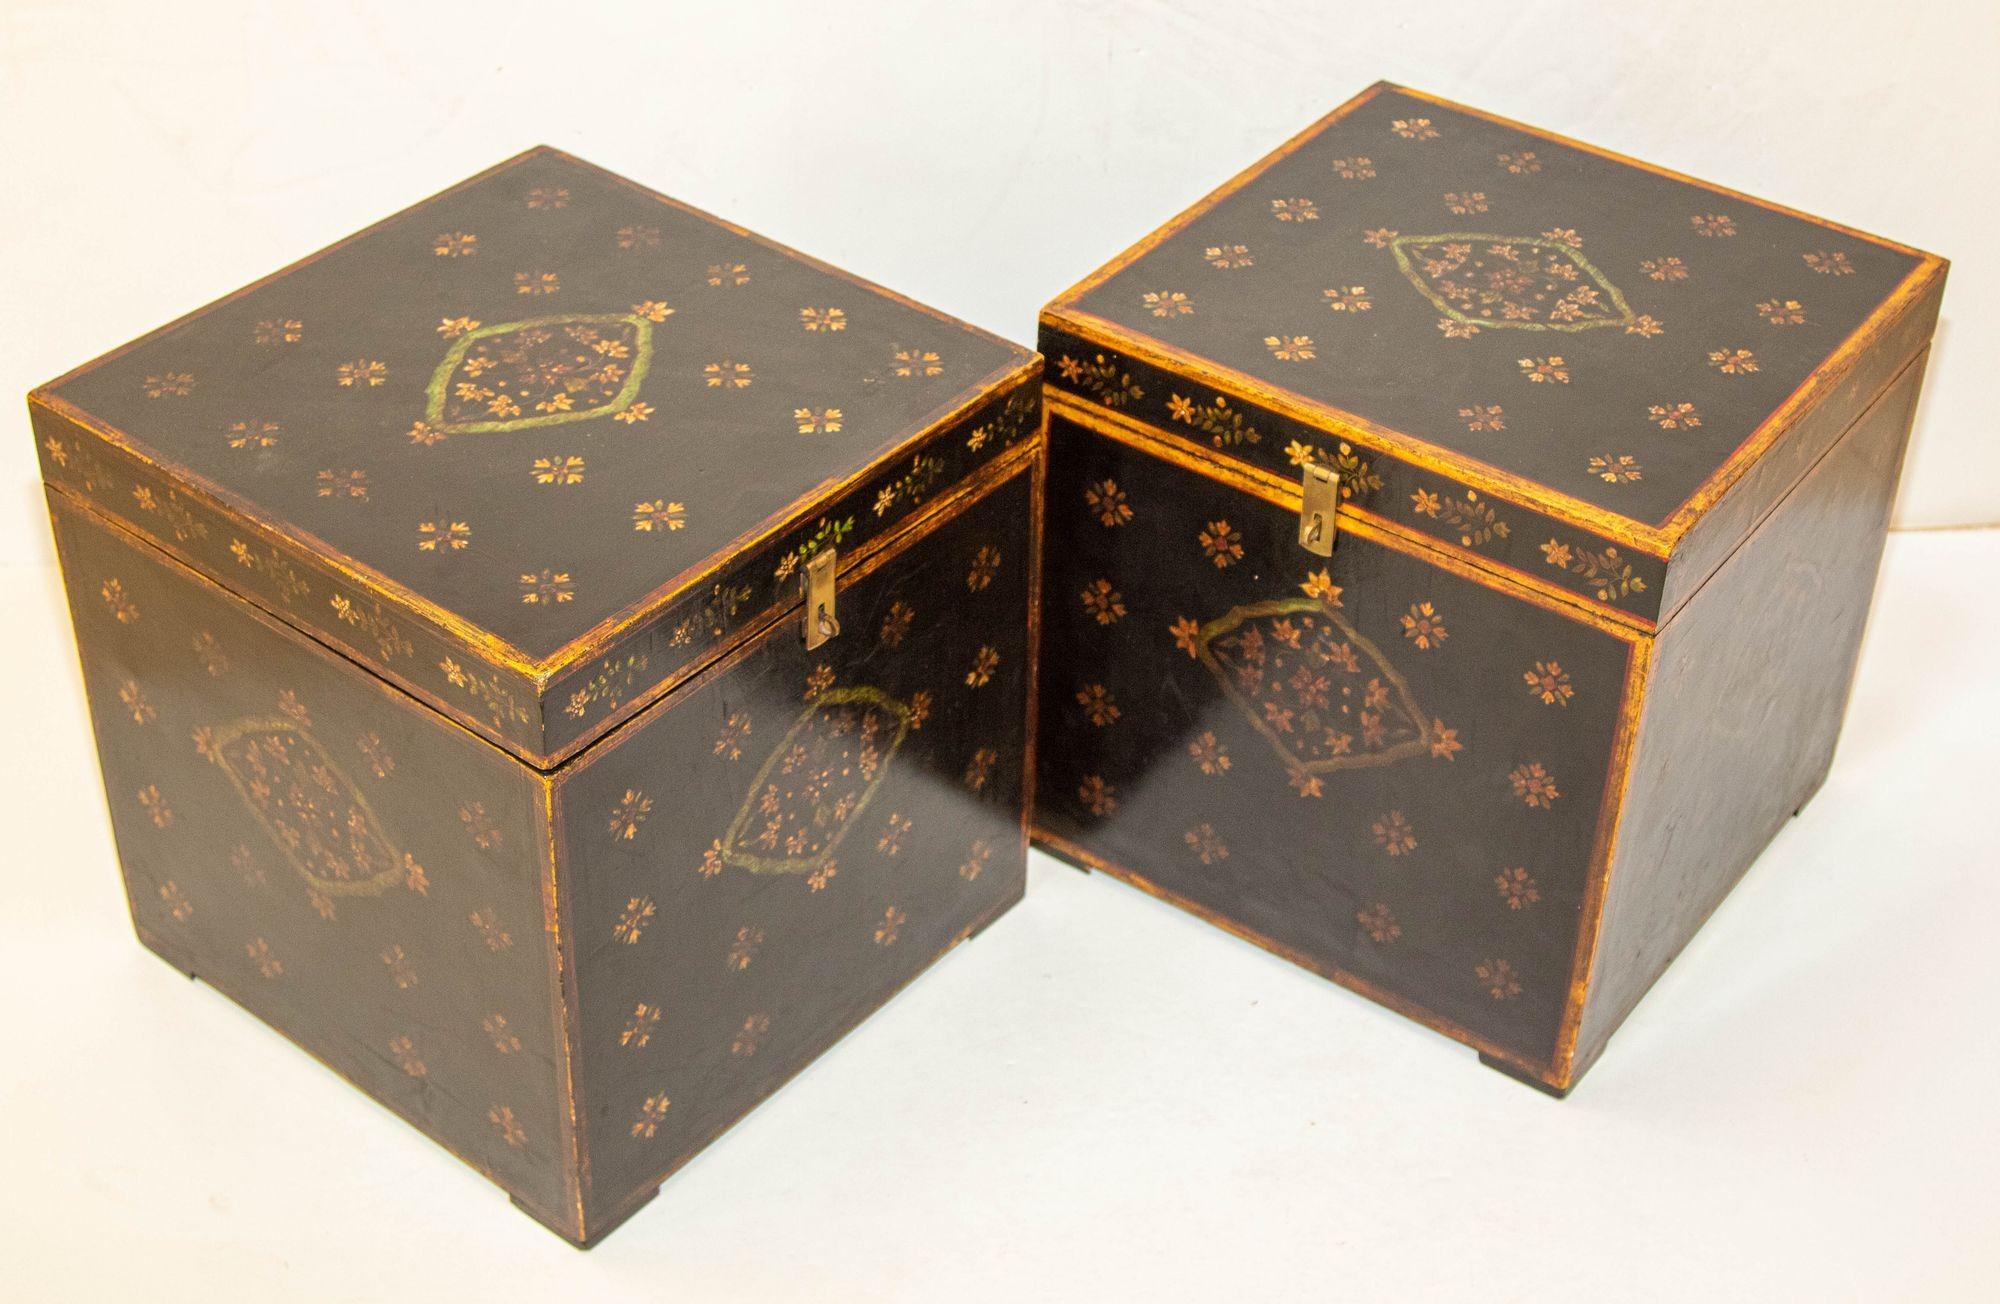 1950s vintage pair of Folk Art lacquer hand painted decorative storage wooden trunks.
Pair of Mughal style small wood trunks with hinged lid clean lines and beautiful floral Rajasthani floral decor, these black lacquered side tables will be an